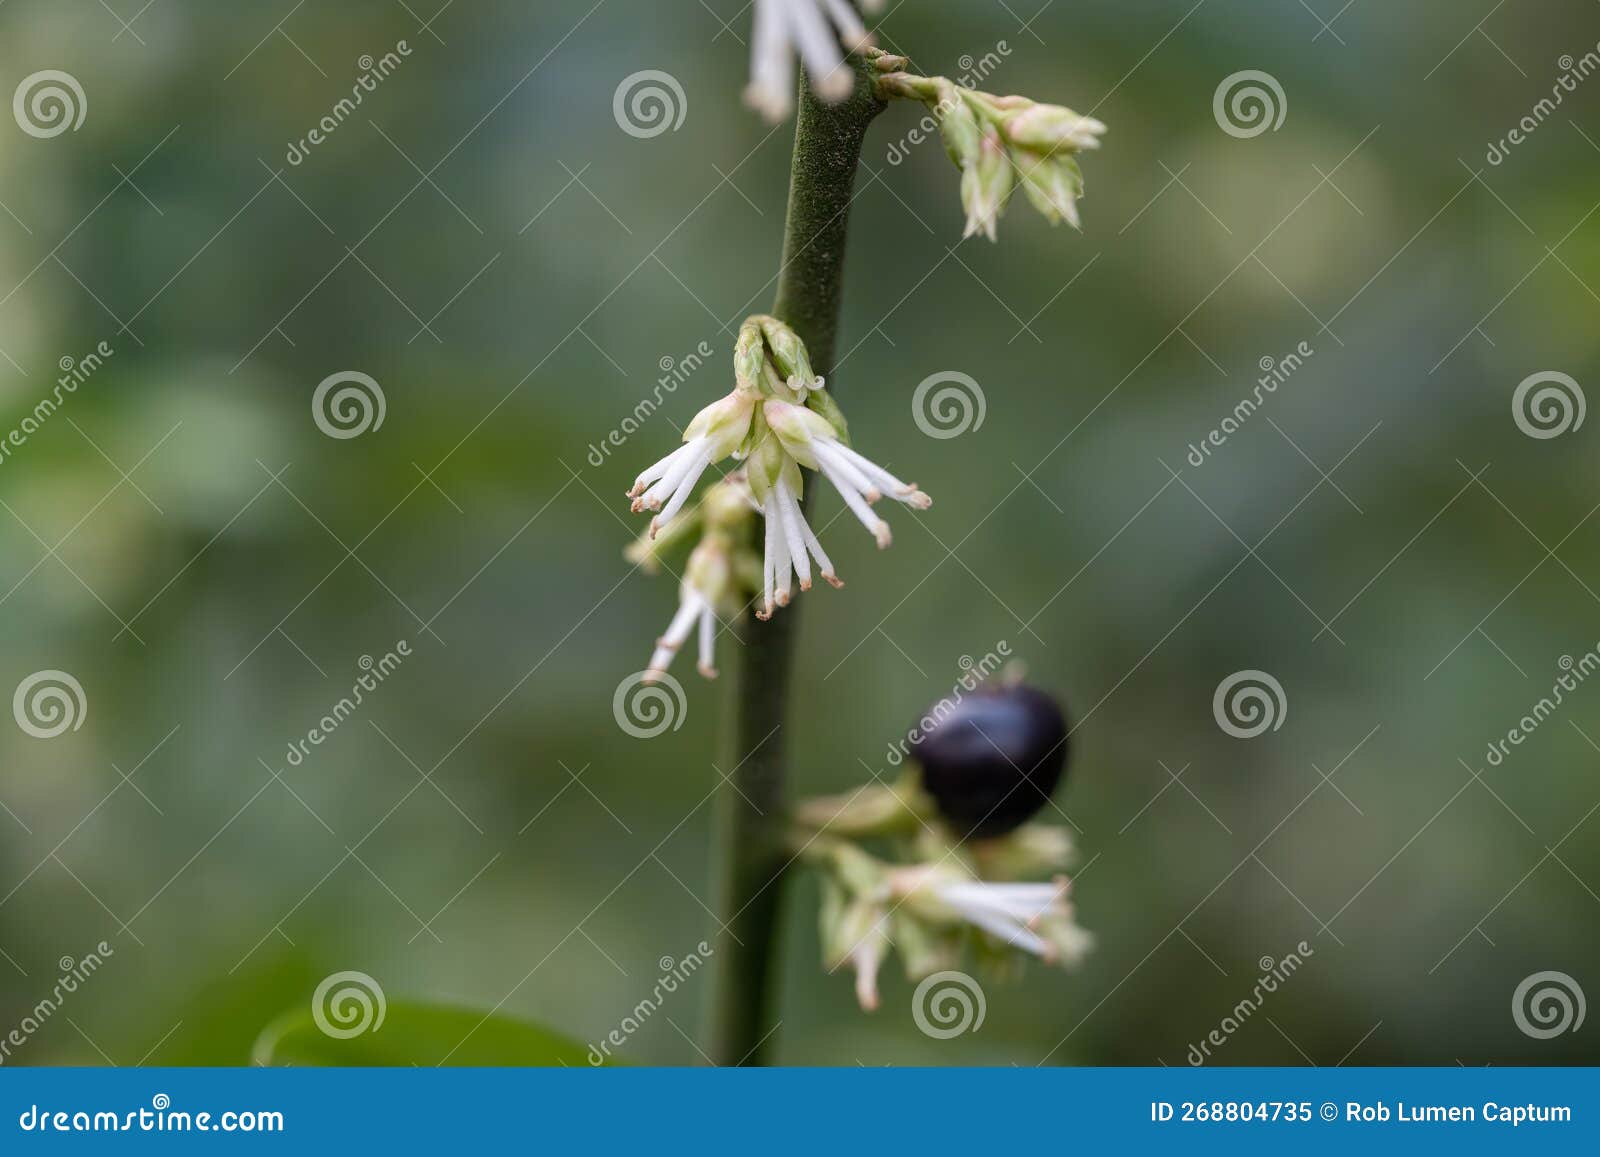 himalayan sweet box, sarcococca hookeriana fragrant white flowers and black fruit